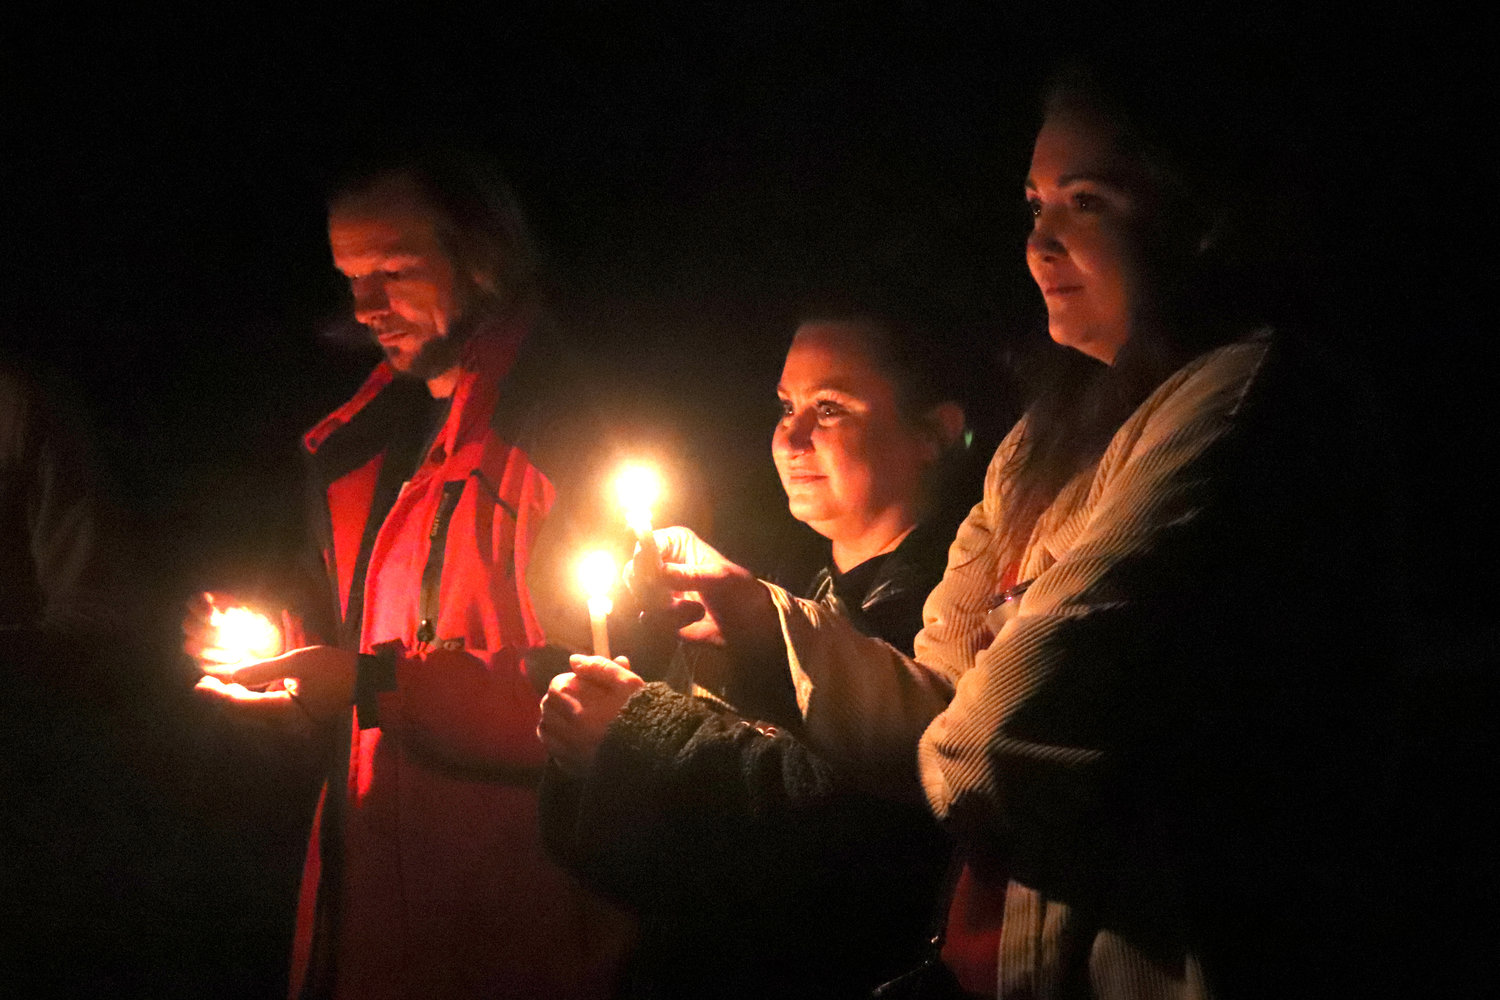 Friends and family of Karlee Bodine’s fiancee, Mitchell Davidson-Link, 33, who died unexpectedly in December, joined in a joint vigil for Davidson-Link and murdered Thurston County woman Karen Bodine near Rochester on Saturday.